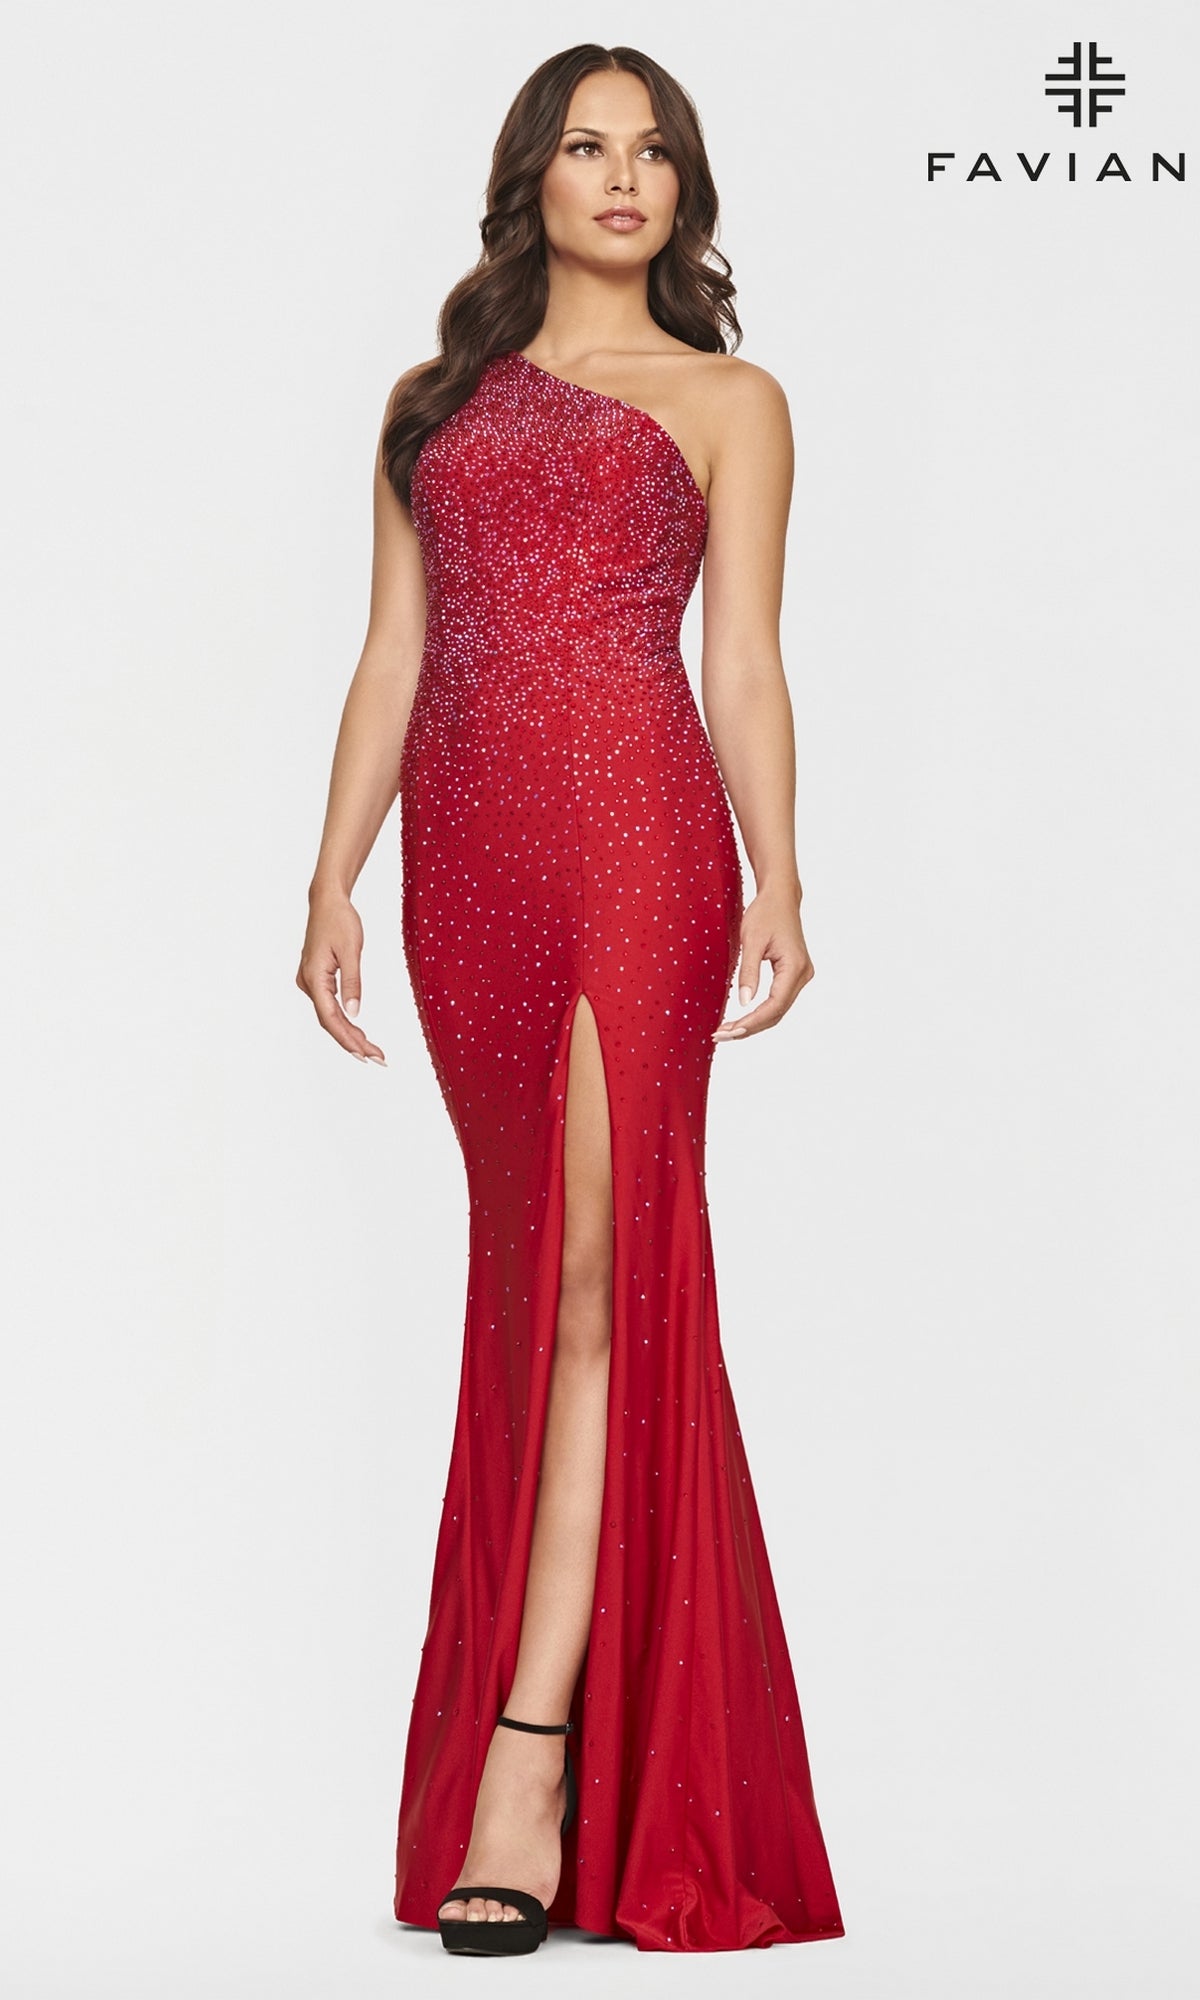  Long One-Shoulder Hot Pink Prom Dress by Faviana